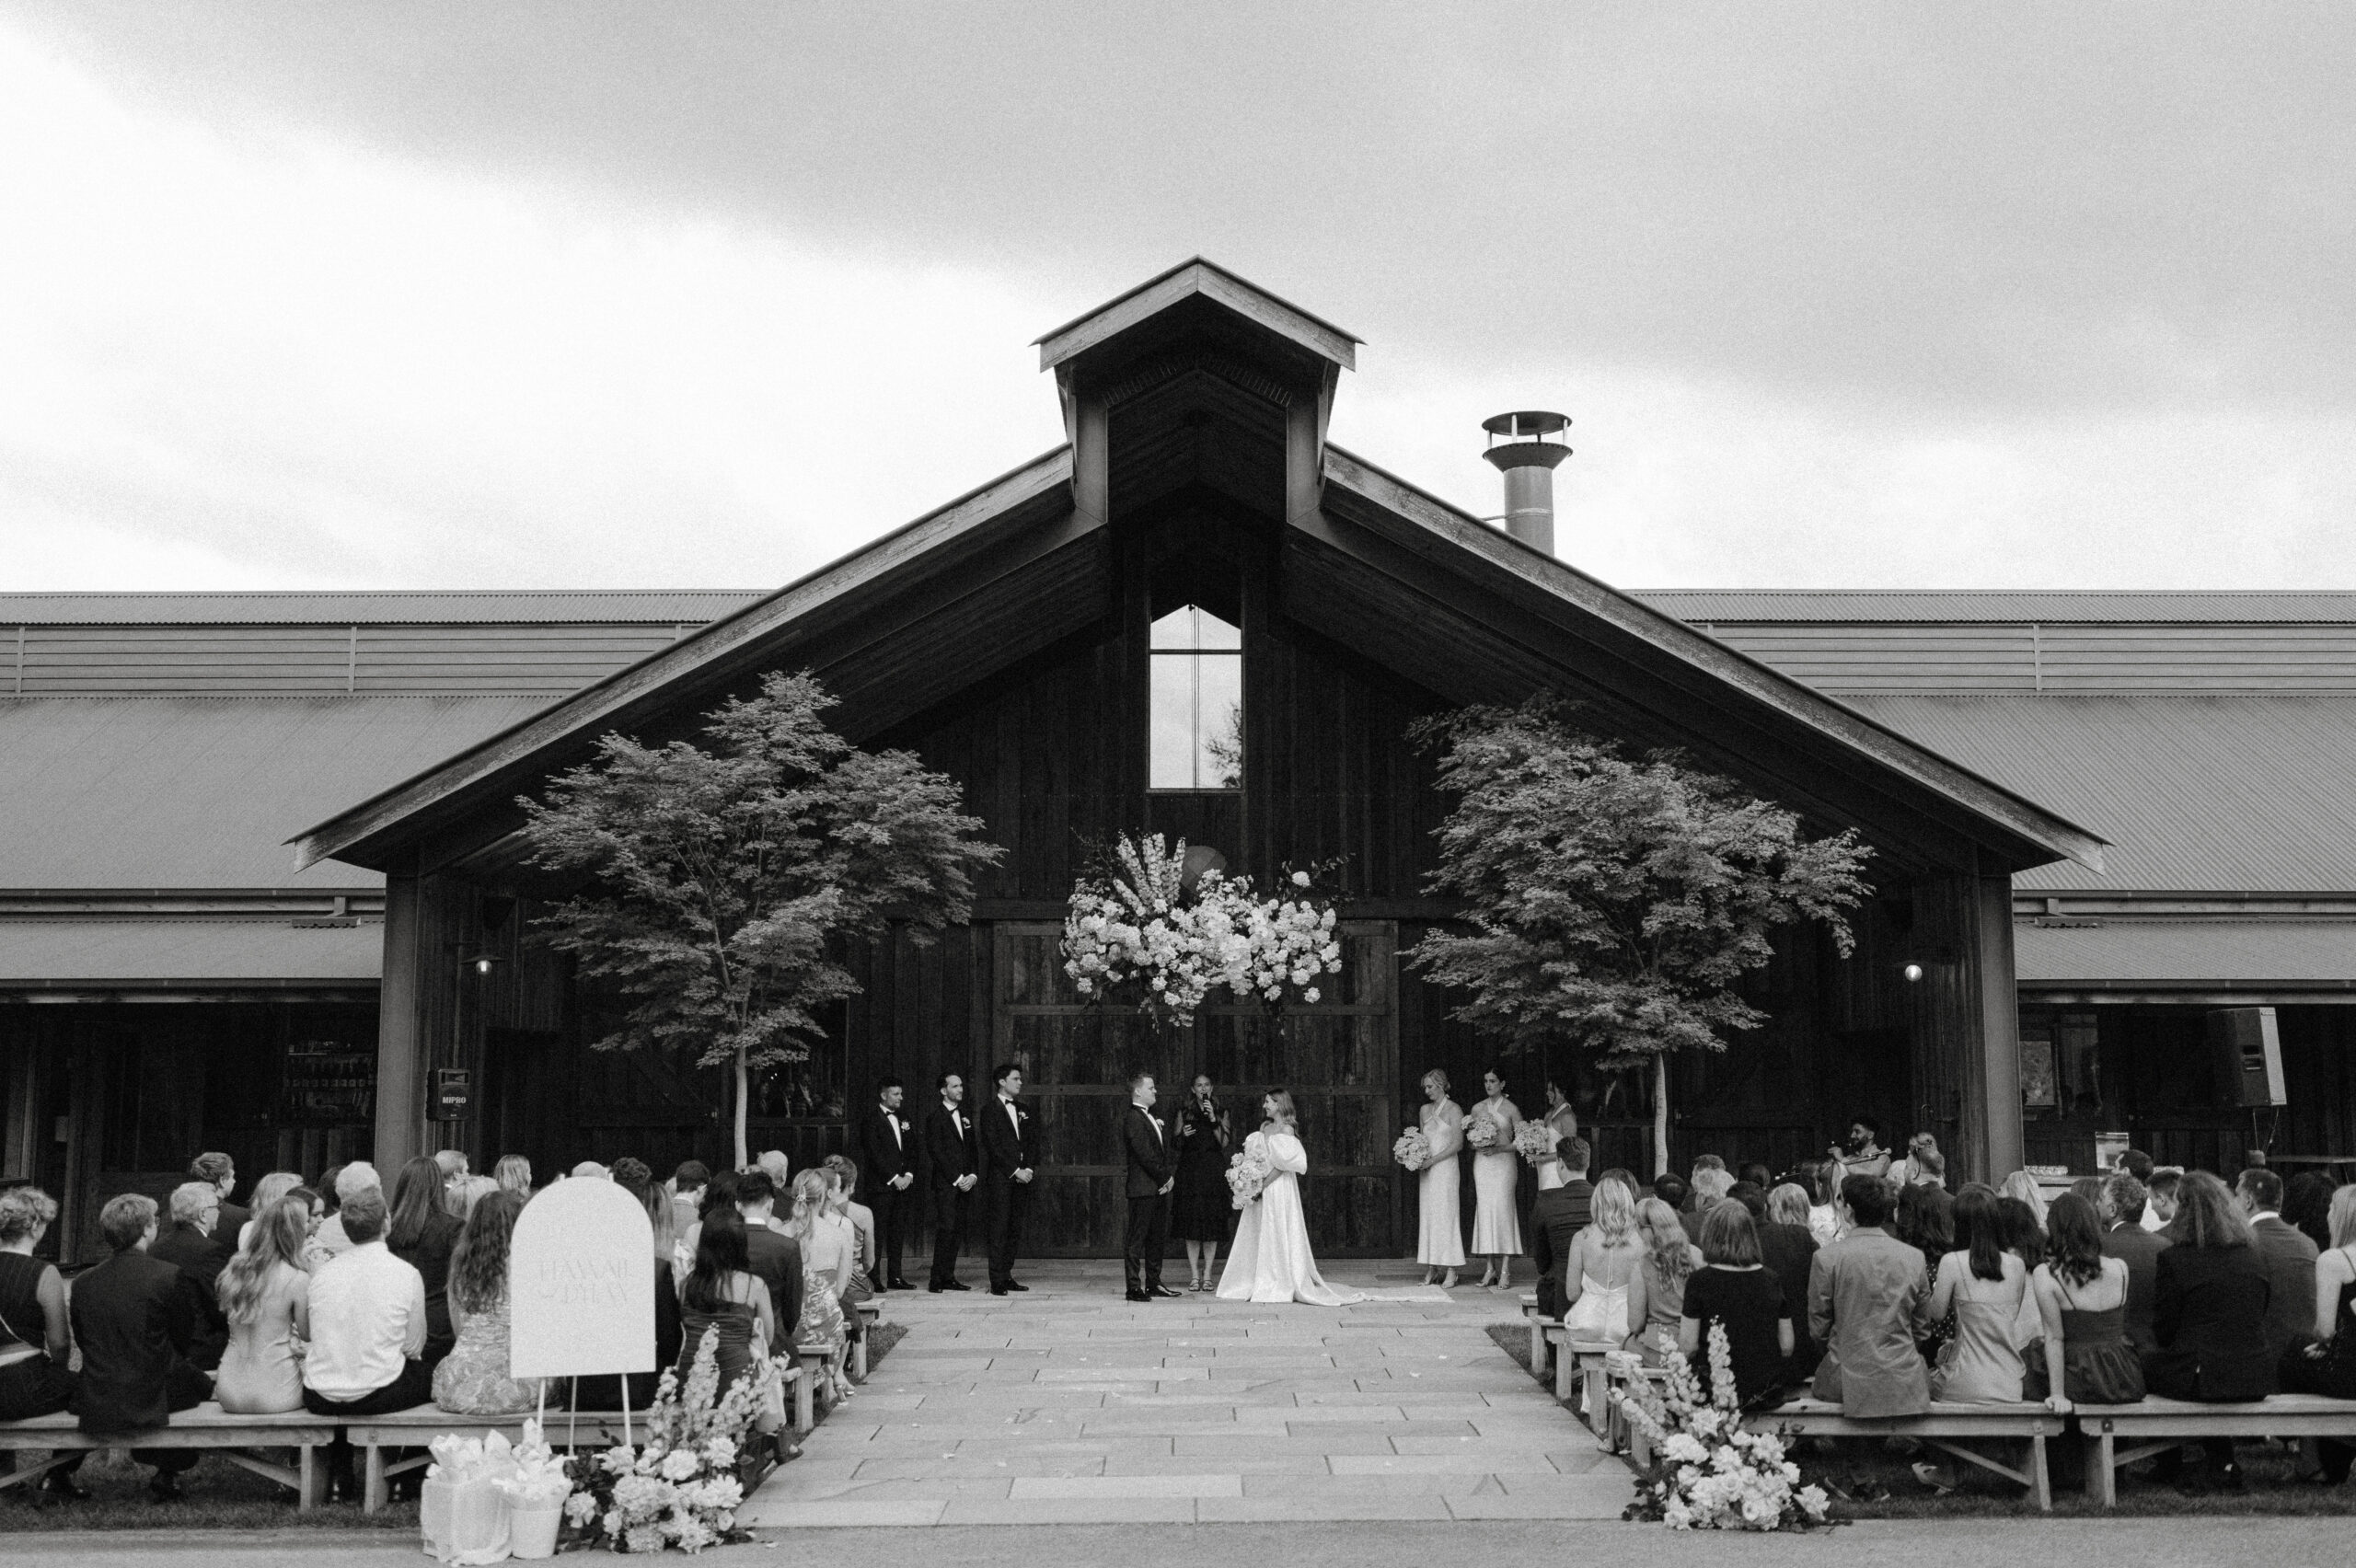 A wide photo showing a ceremony taking place under the bendooley stables architectural A Frame.